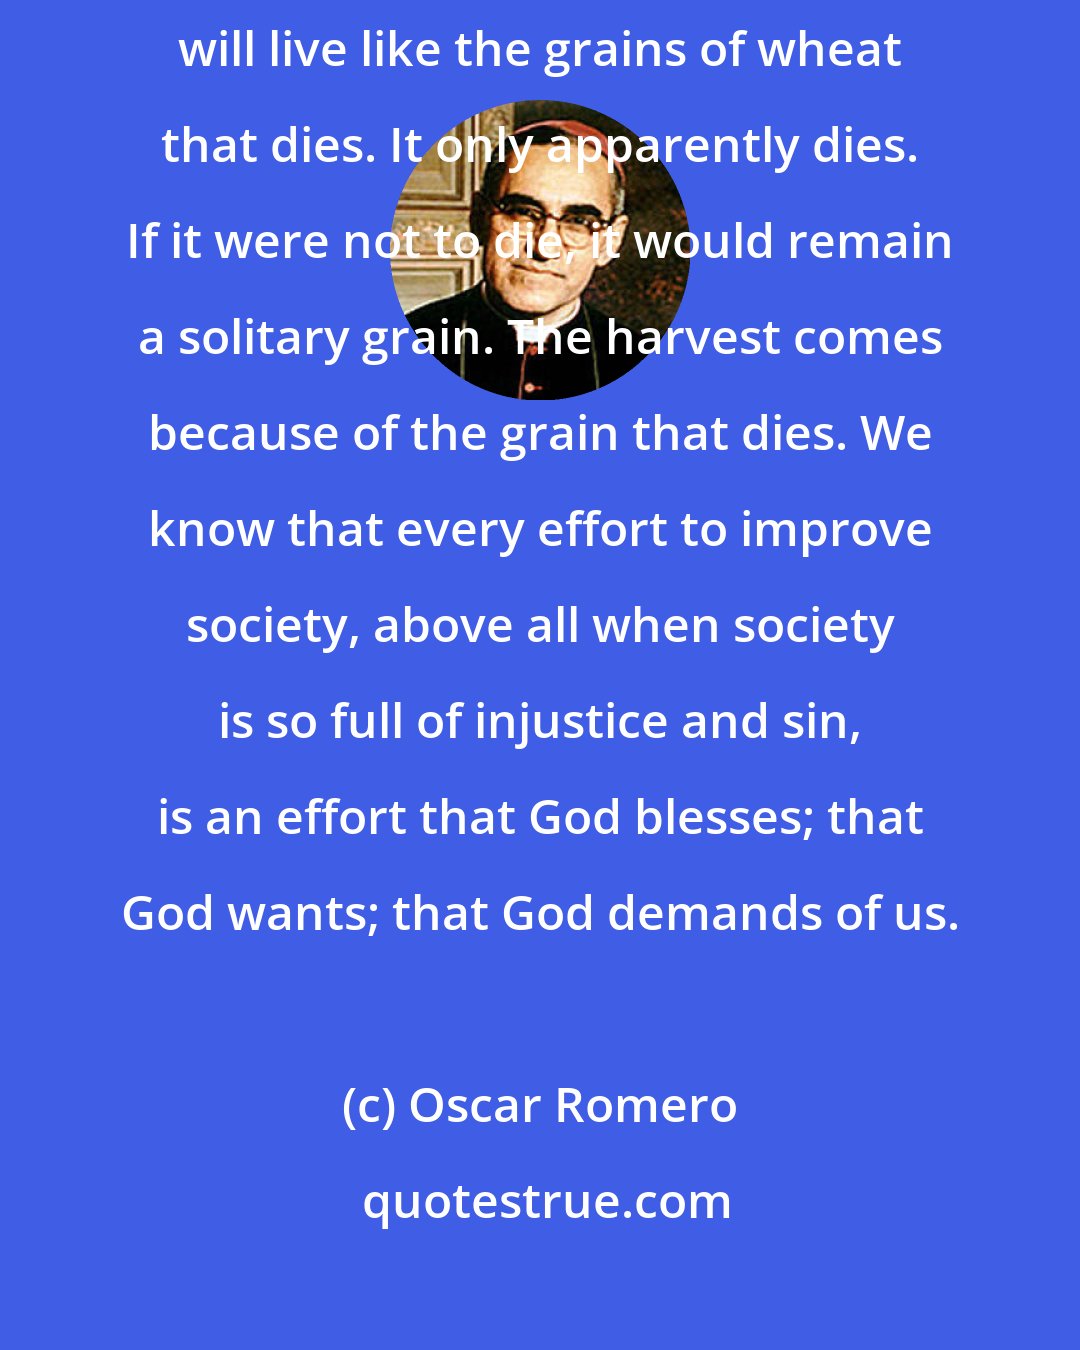 Oscar Romero: Those who surrender to the service of the poor through love of Christ, will live like the grains of wheat that dies. It only apparently dies. If it were not to die, it would remain a solitary grain. The harvest comes because of the grain that dies. We know that every effort to improve society, above all when society is so full of injustice and sin, is an effort that God blesses; that God wants; that God demands of us.